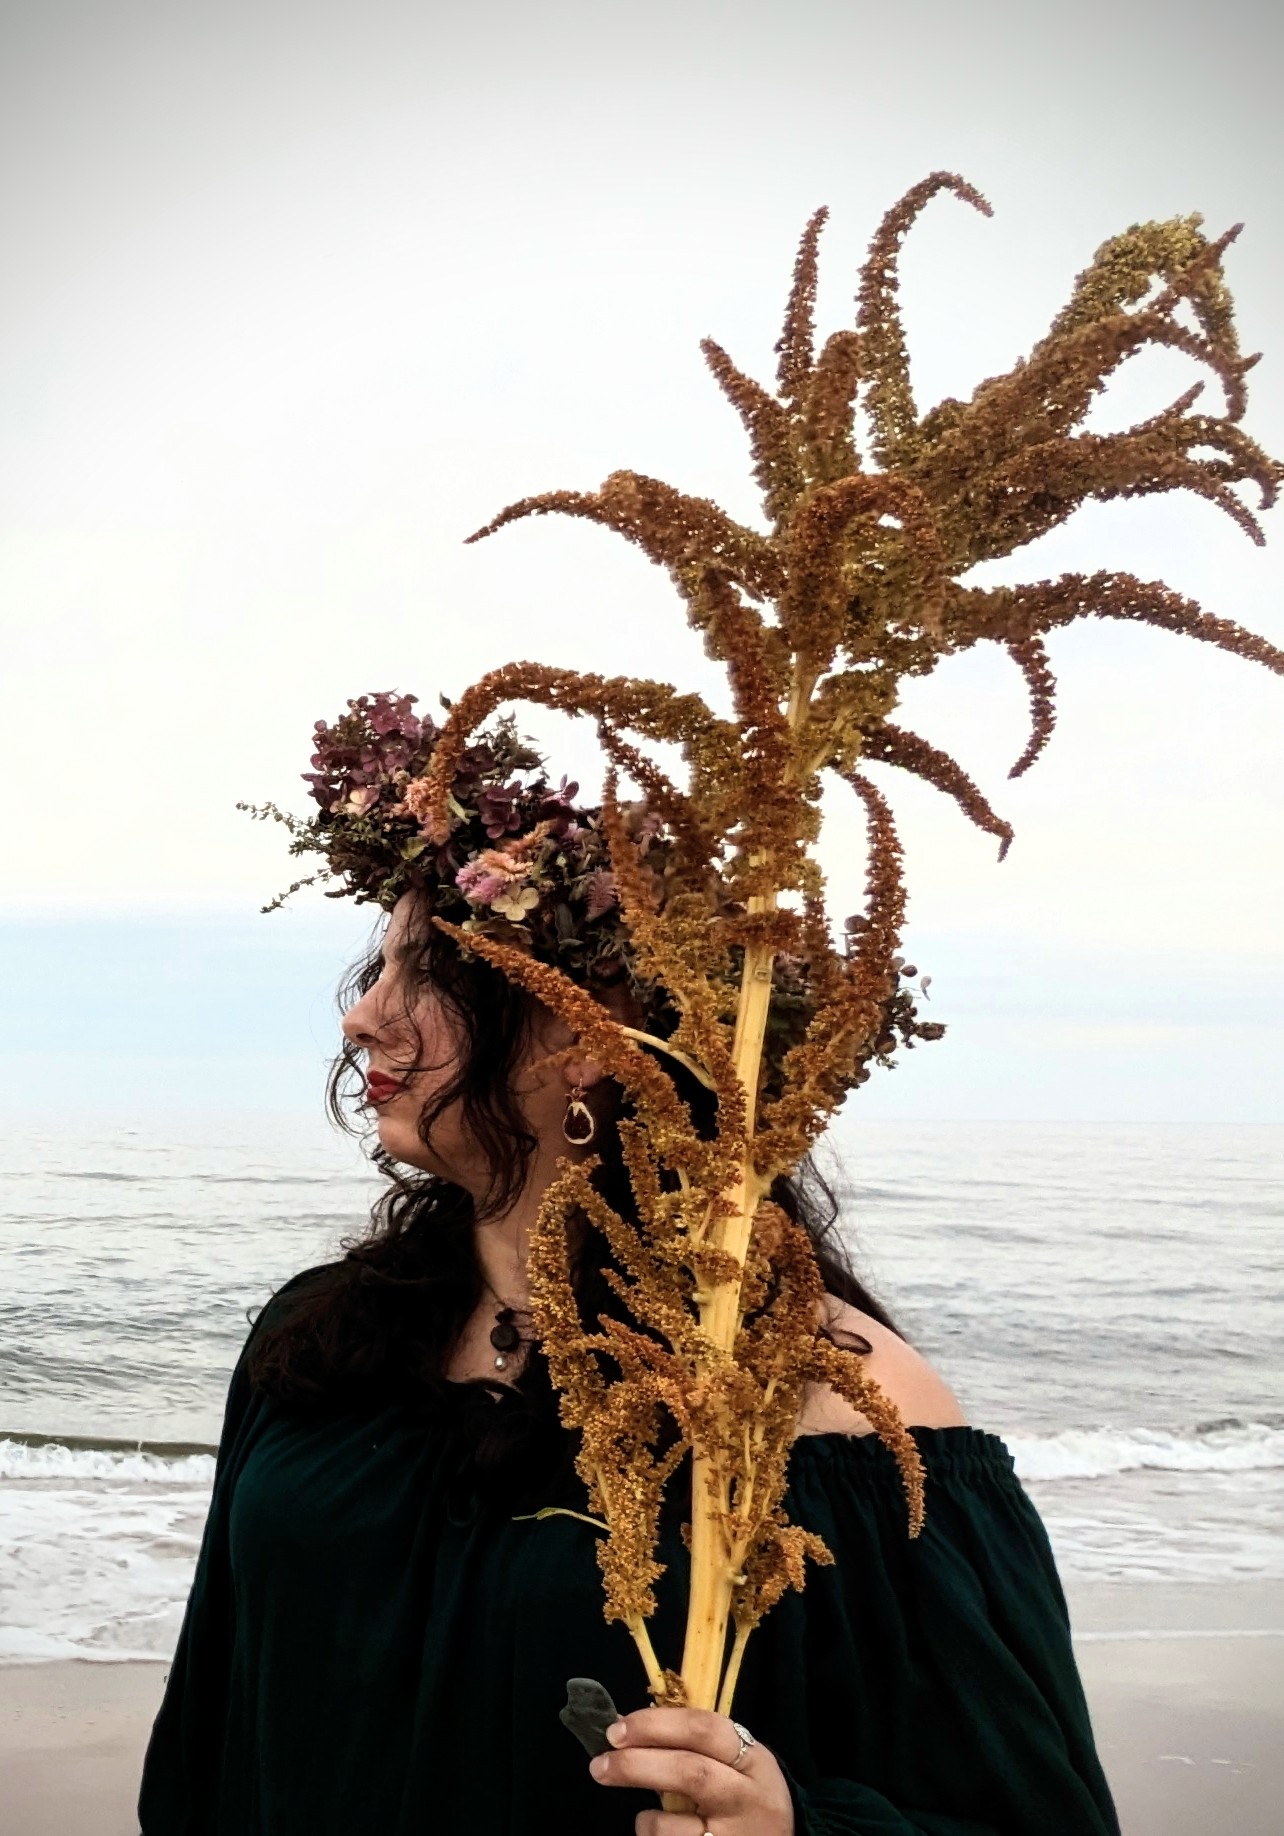 Amal wearing a crown on the beach.